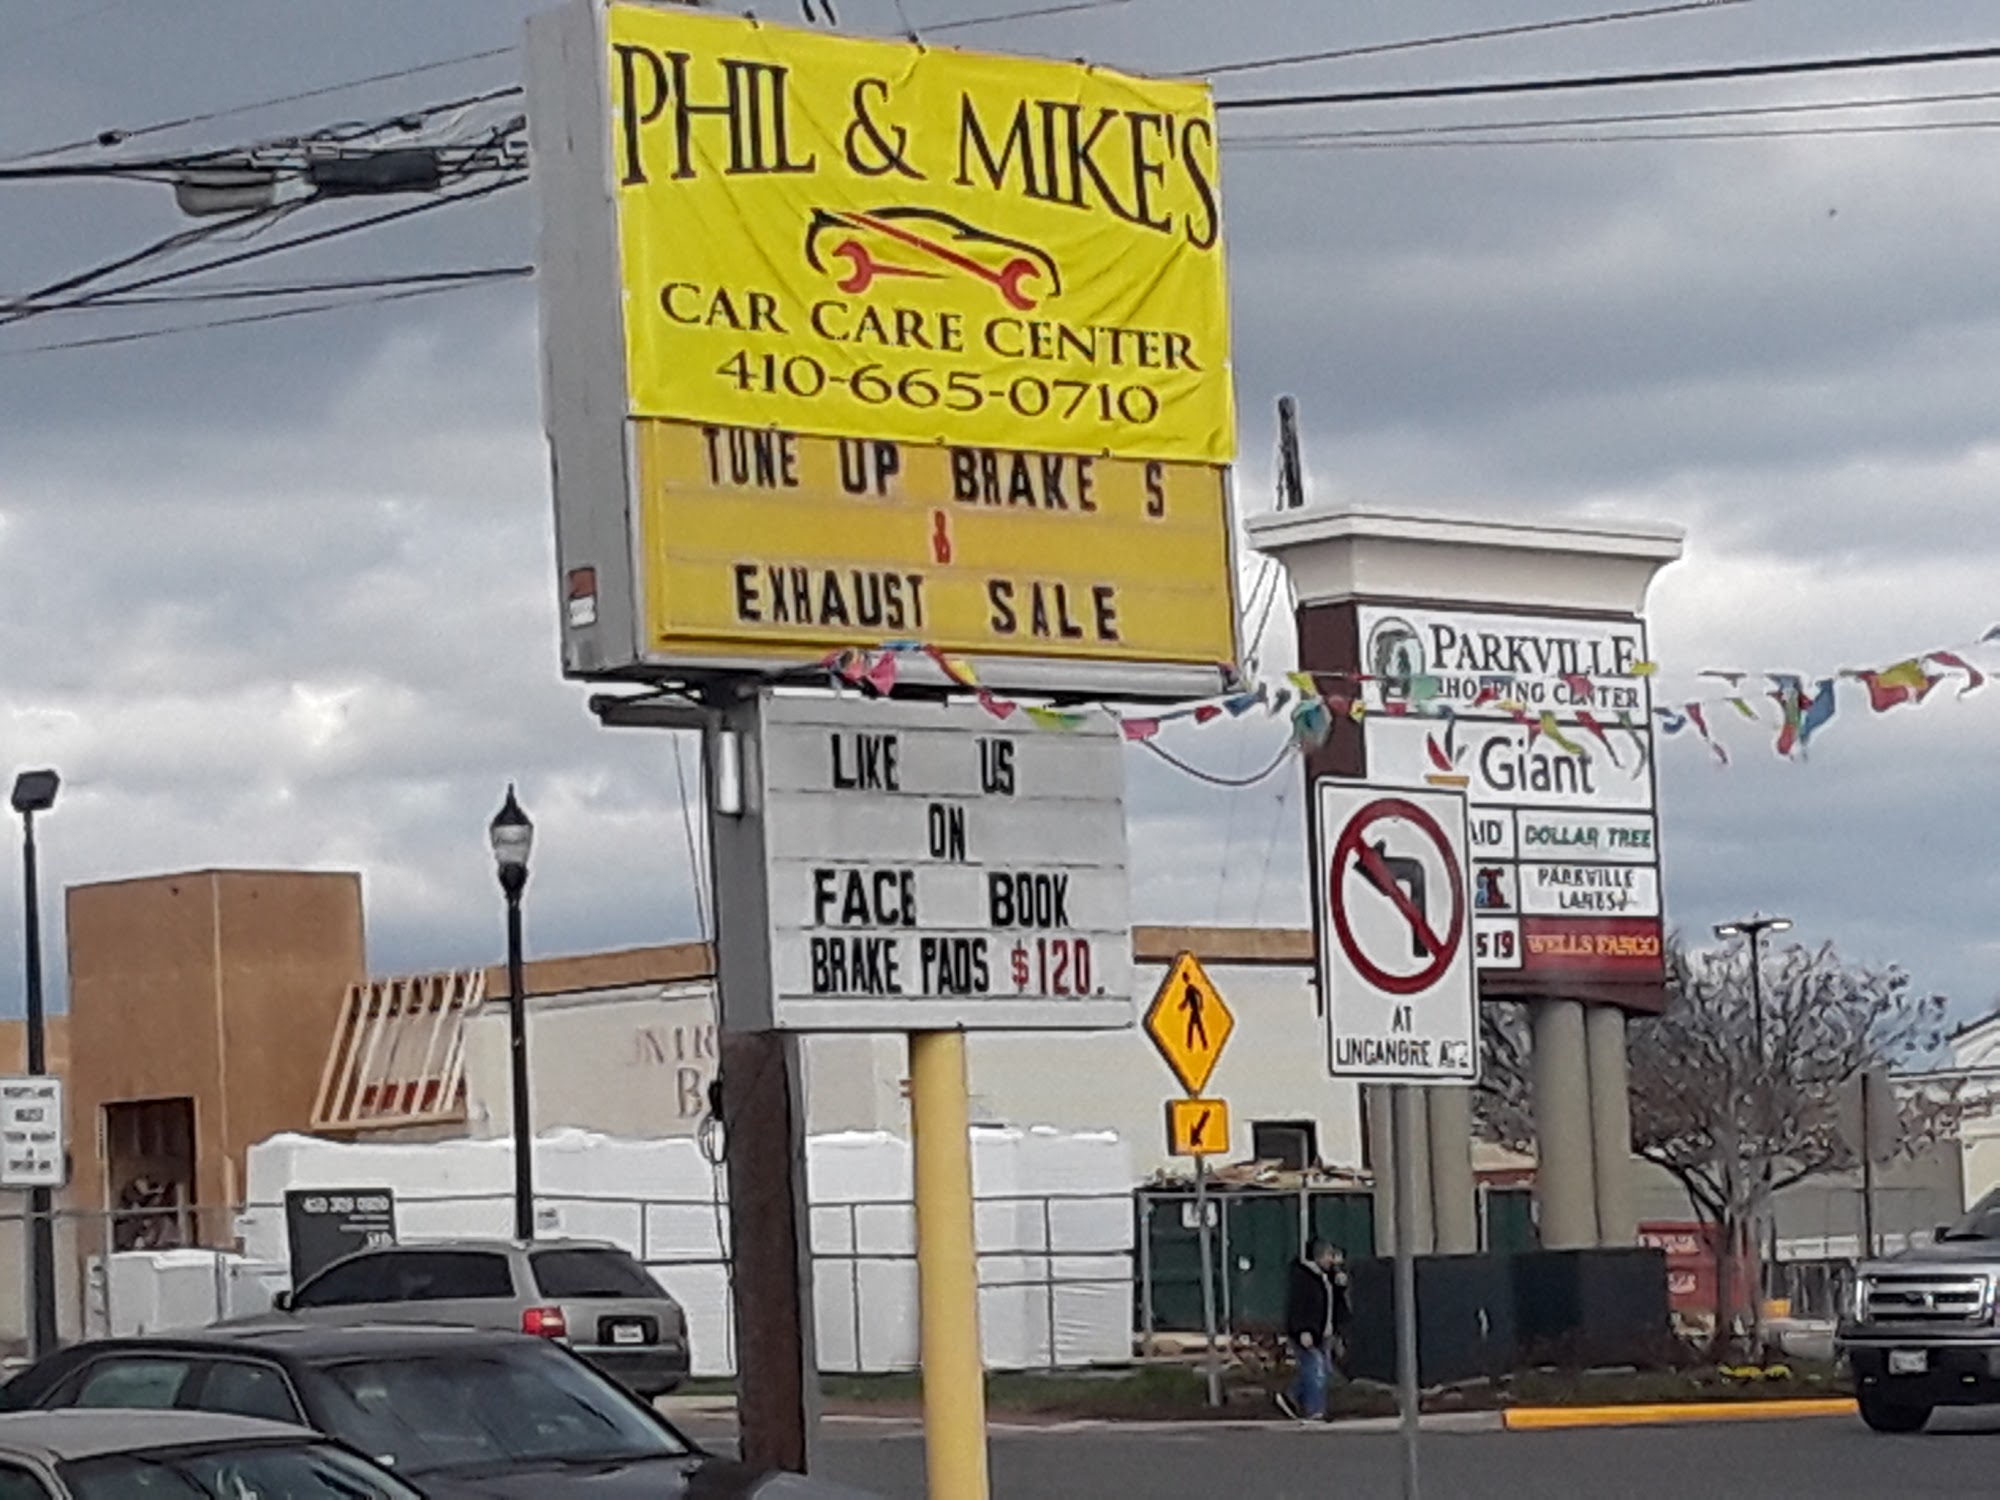 Phil & Mike's Car Care Center